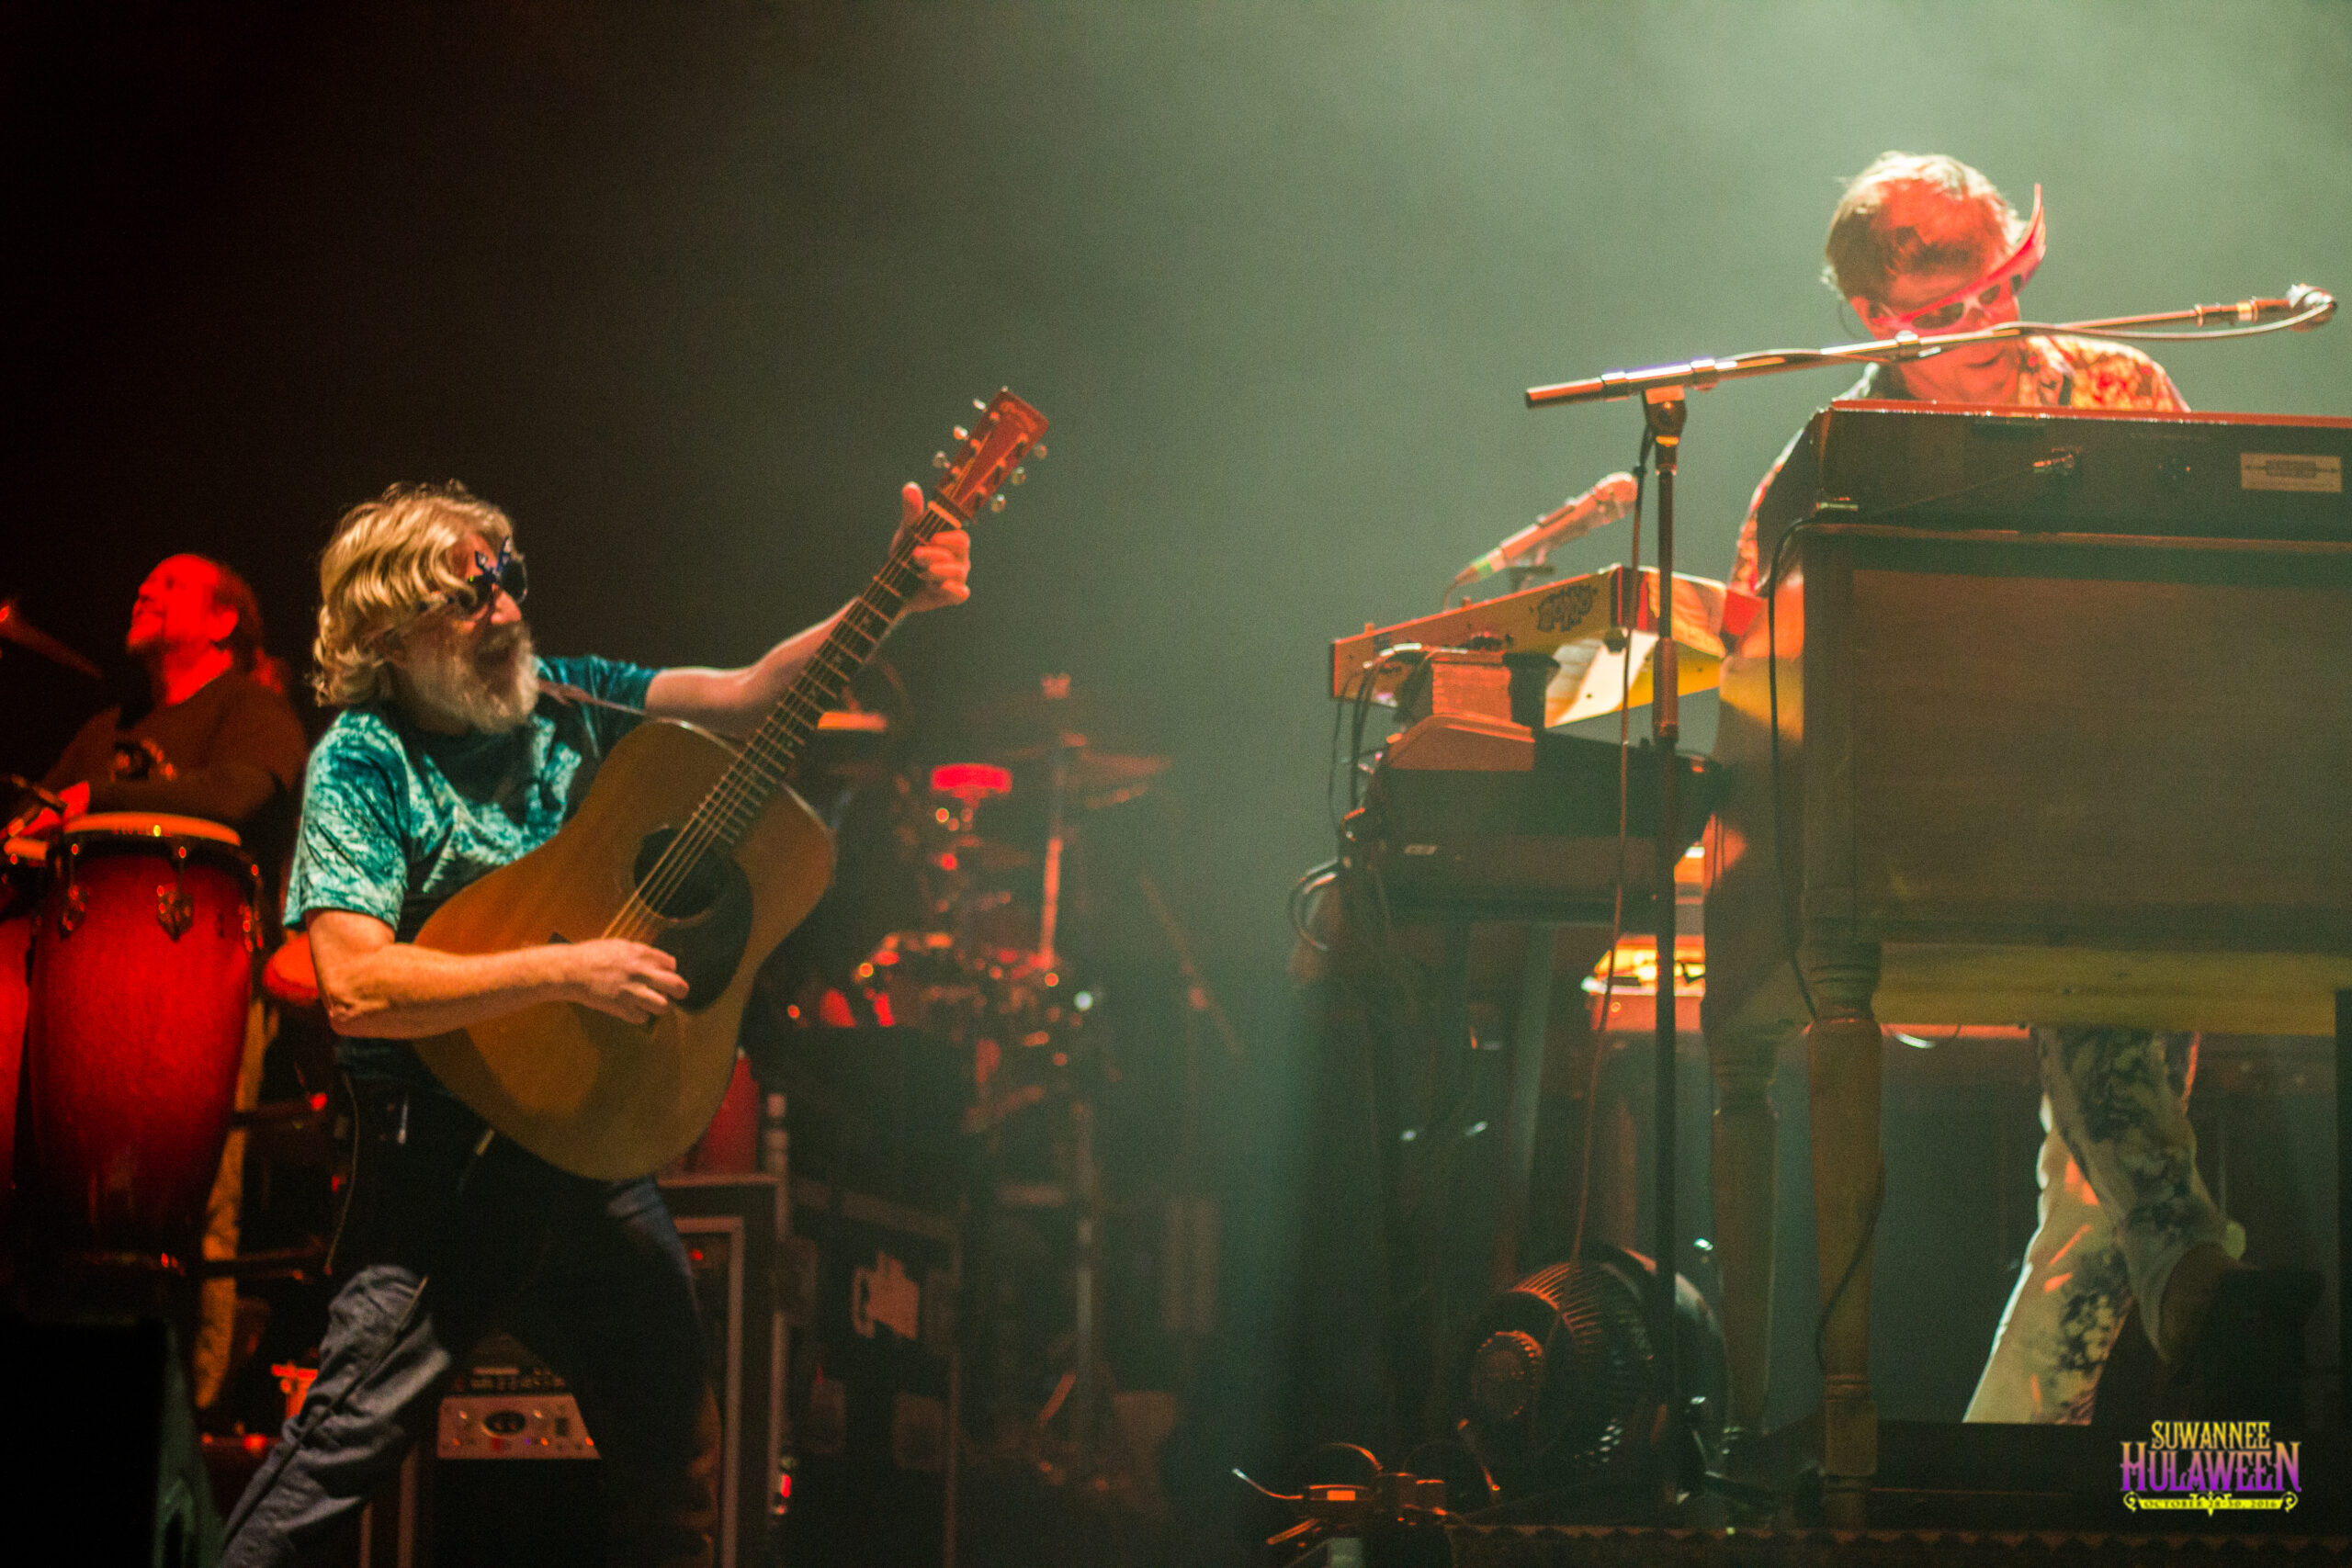 The String Cheese Incident at Suwannee Hulaween 2016. Photo by: Matthew McGuire